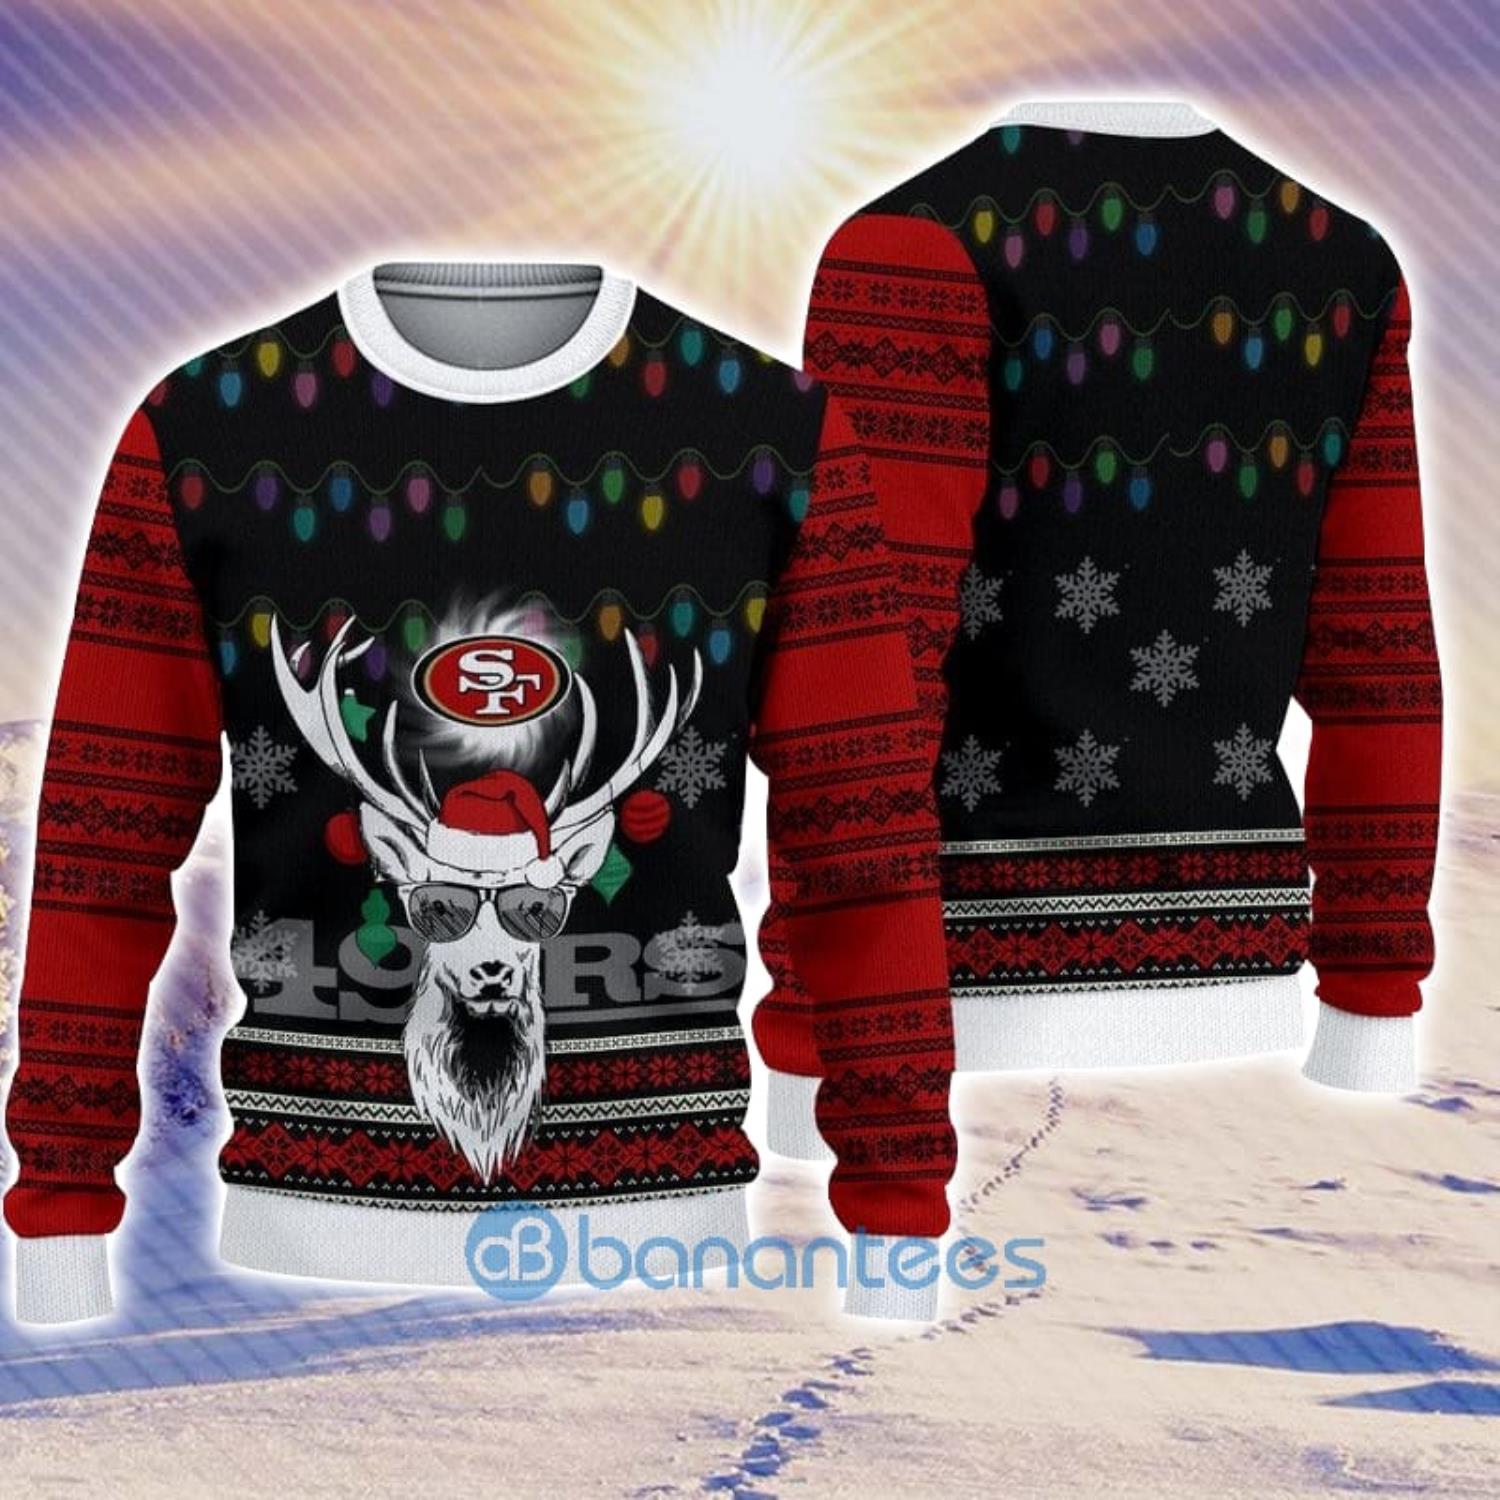 49ers ugly sweater light up